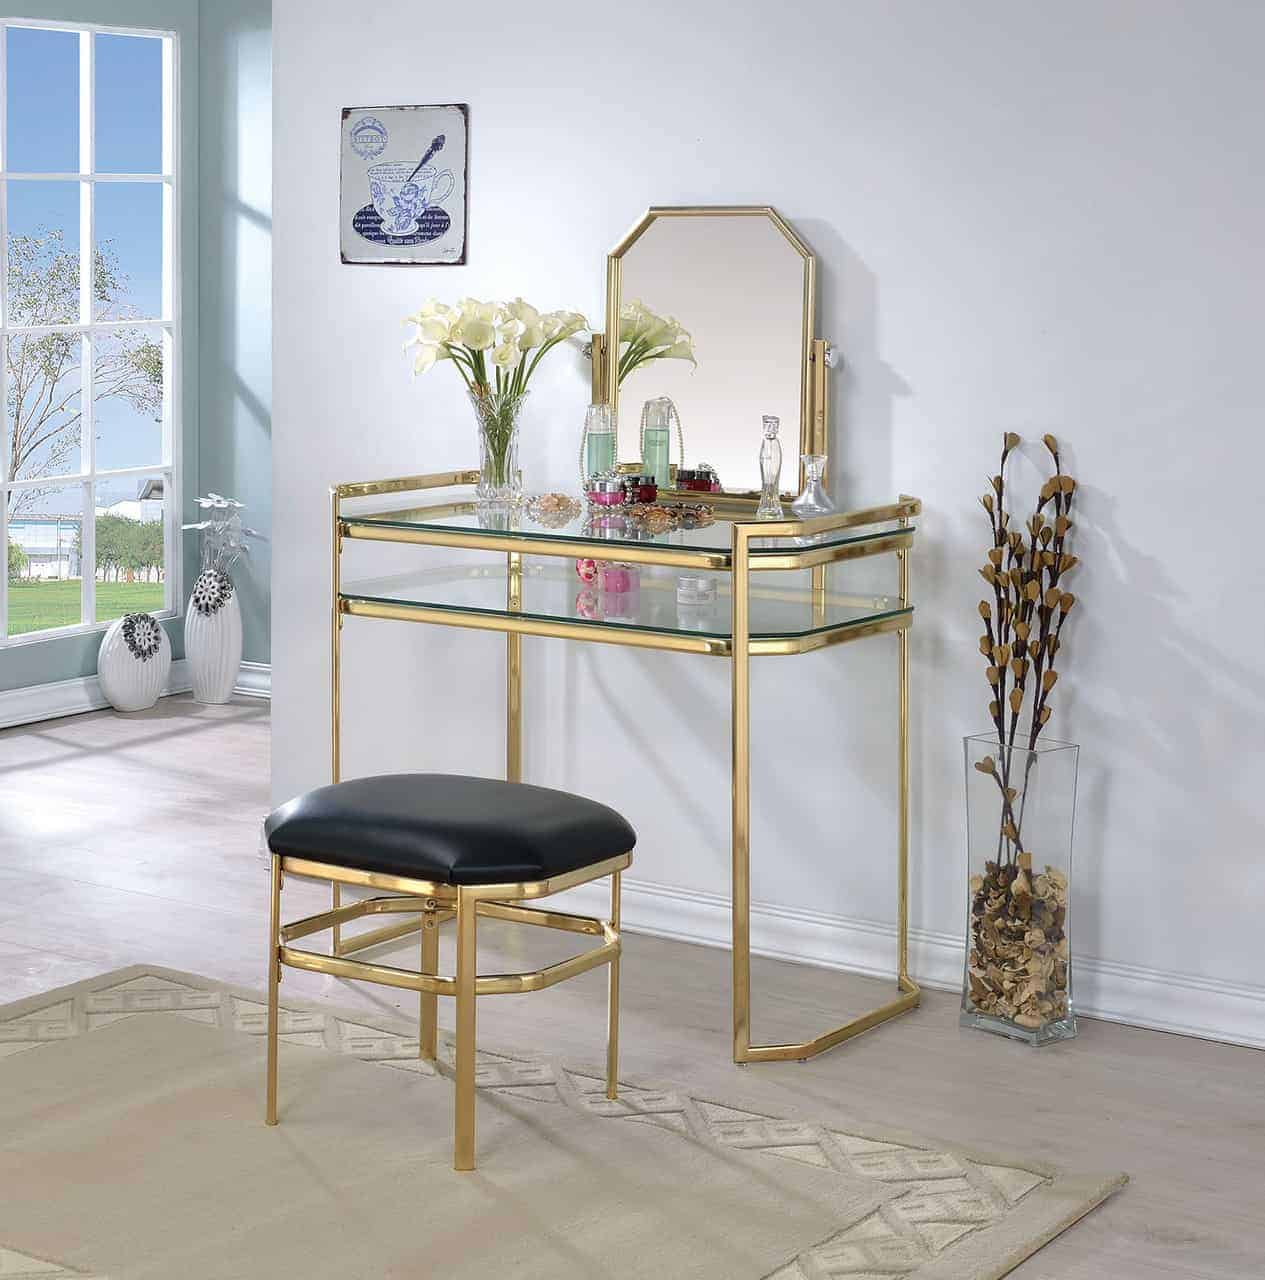 An elegant honey colored metallic dressing table design with a small square mirror, minimum storage space, and a matching stool, in a white room.